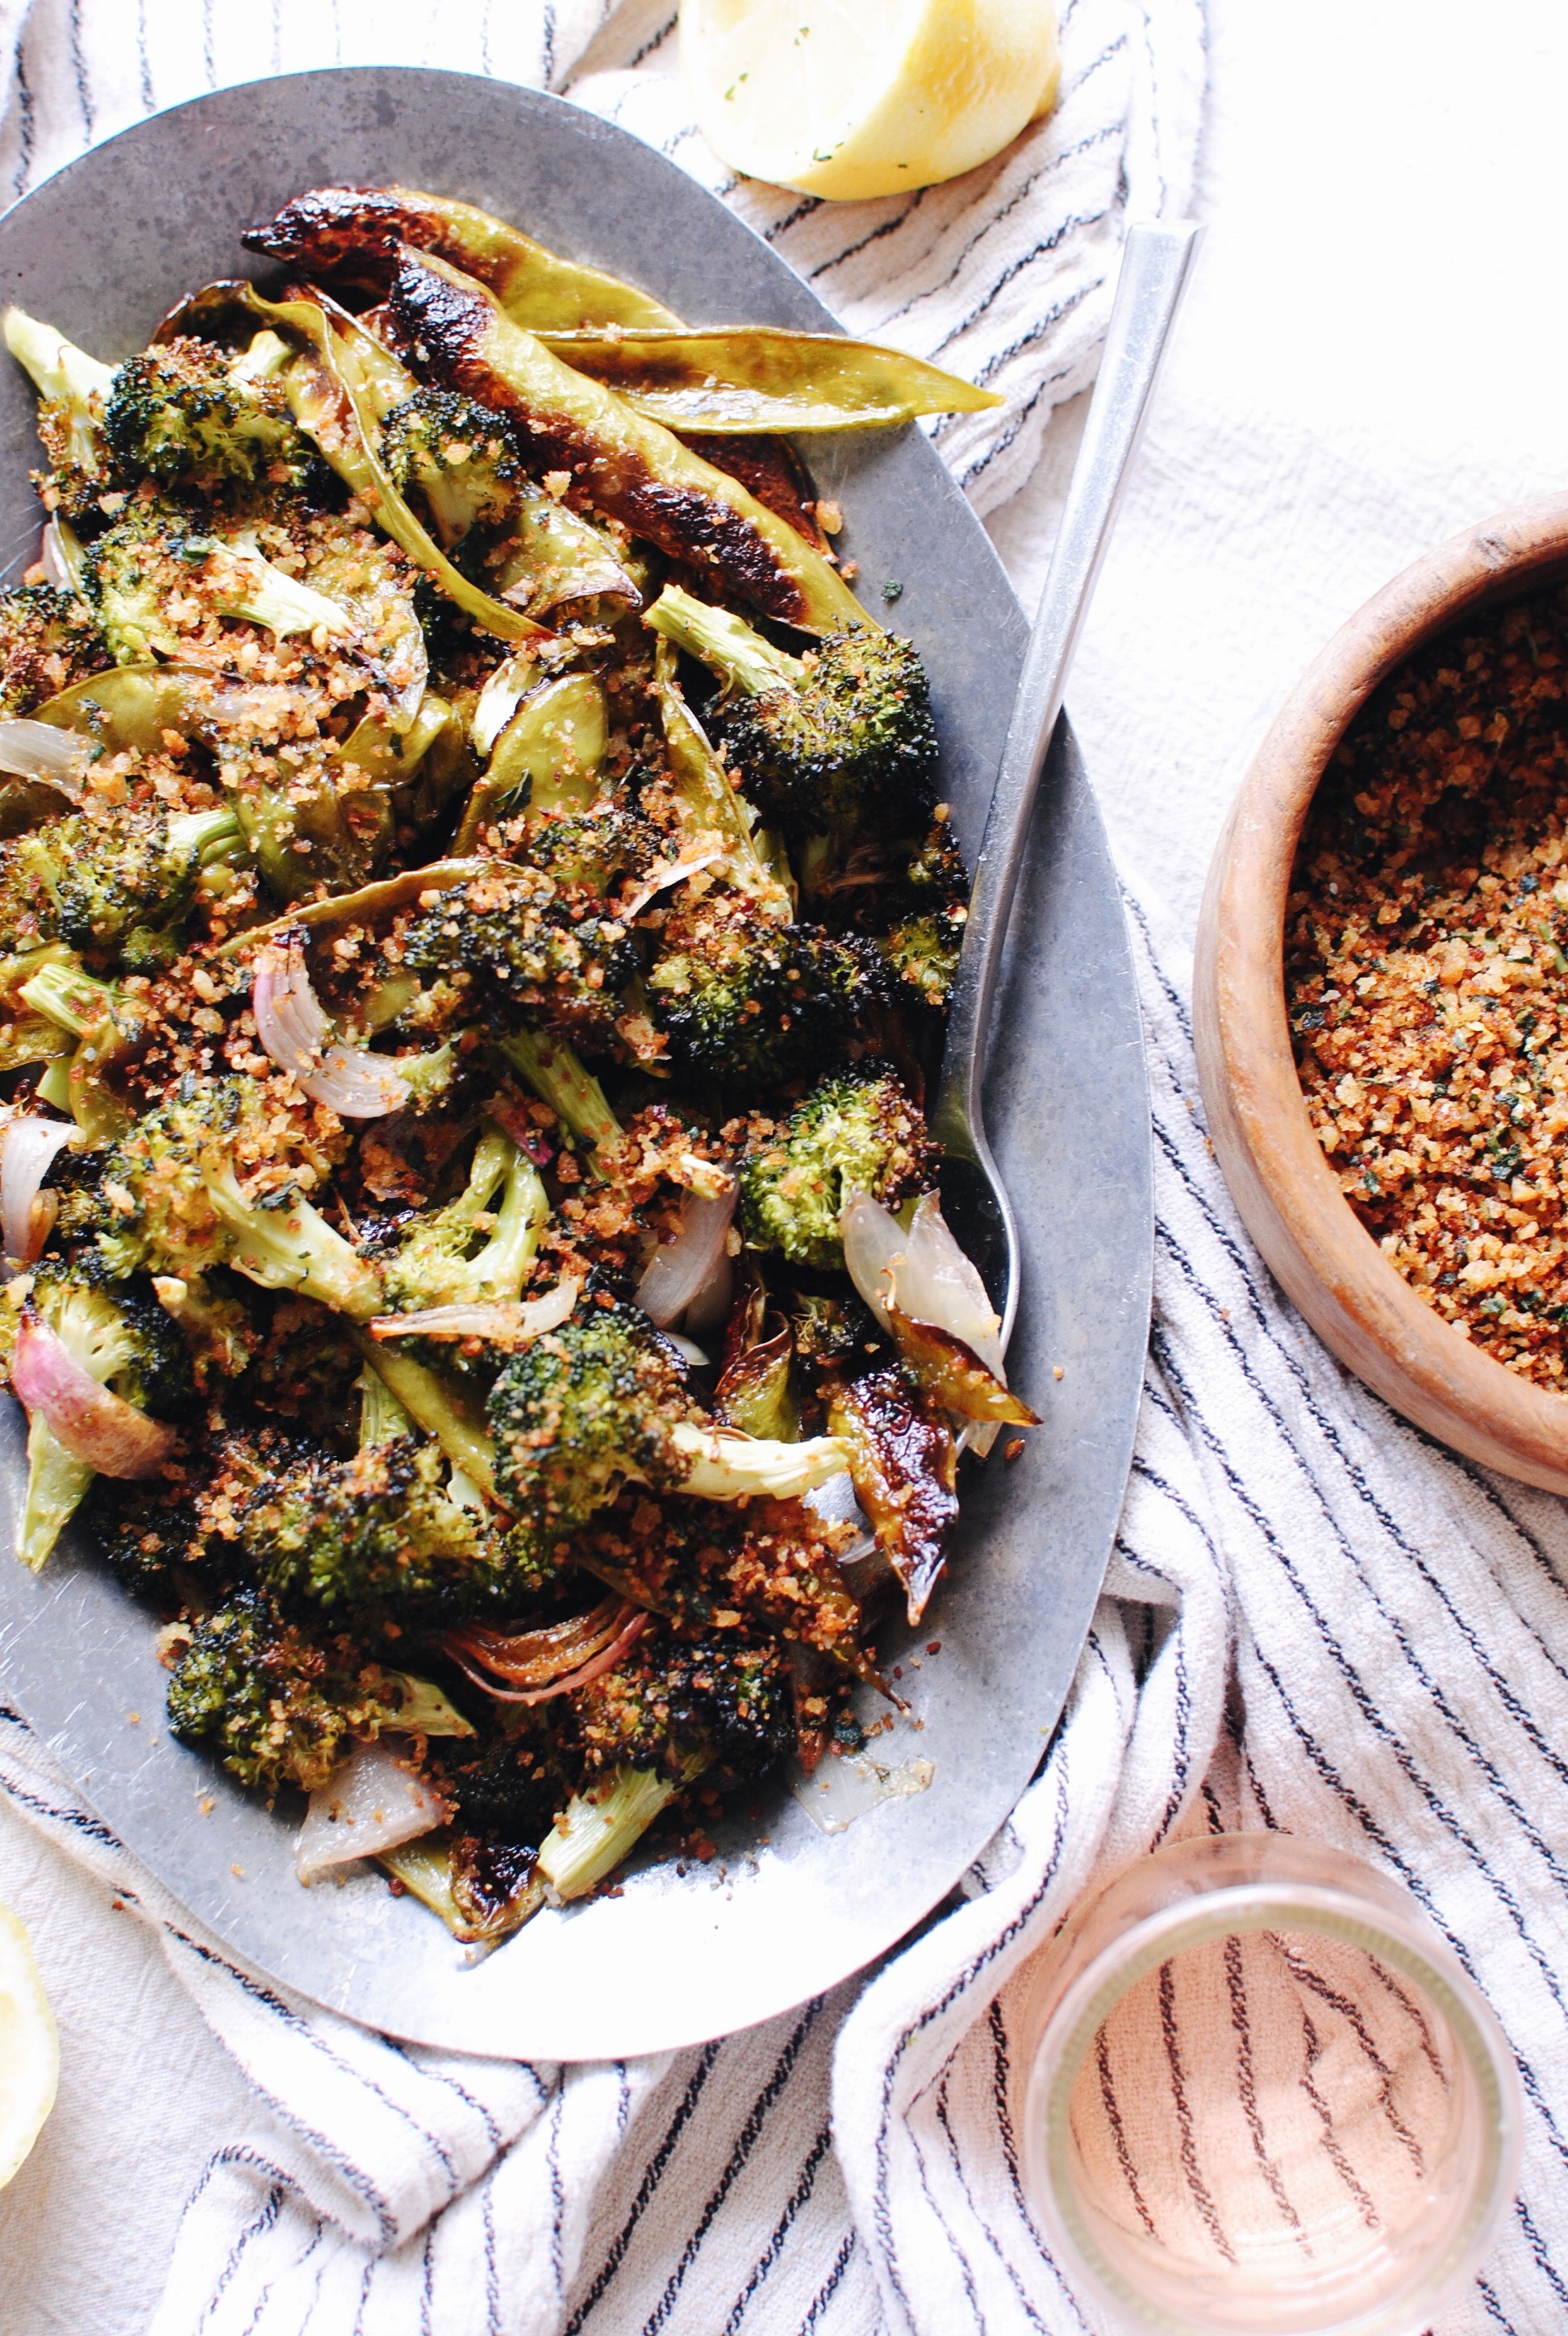 Roasted Broccoli and Snow Peas with Garden Breadcrumbs / Bev Cooks